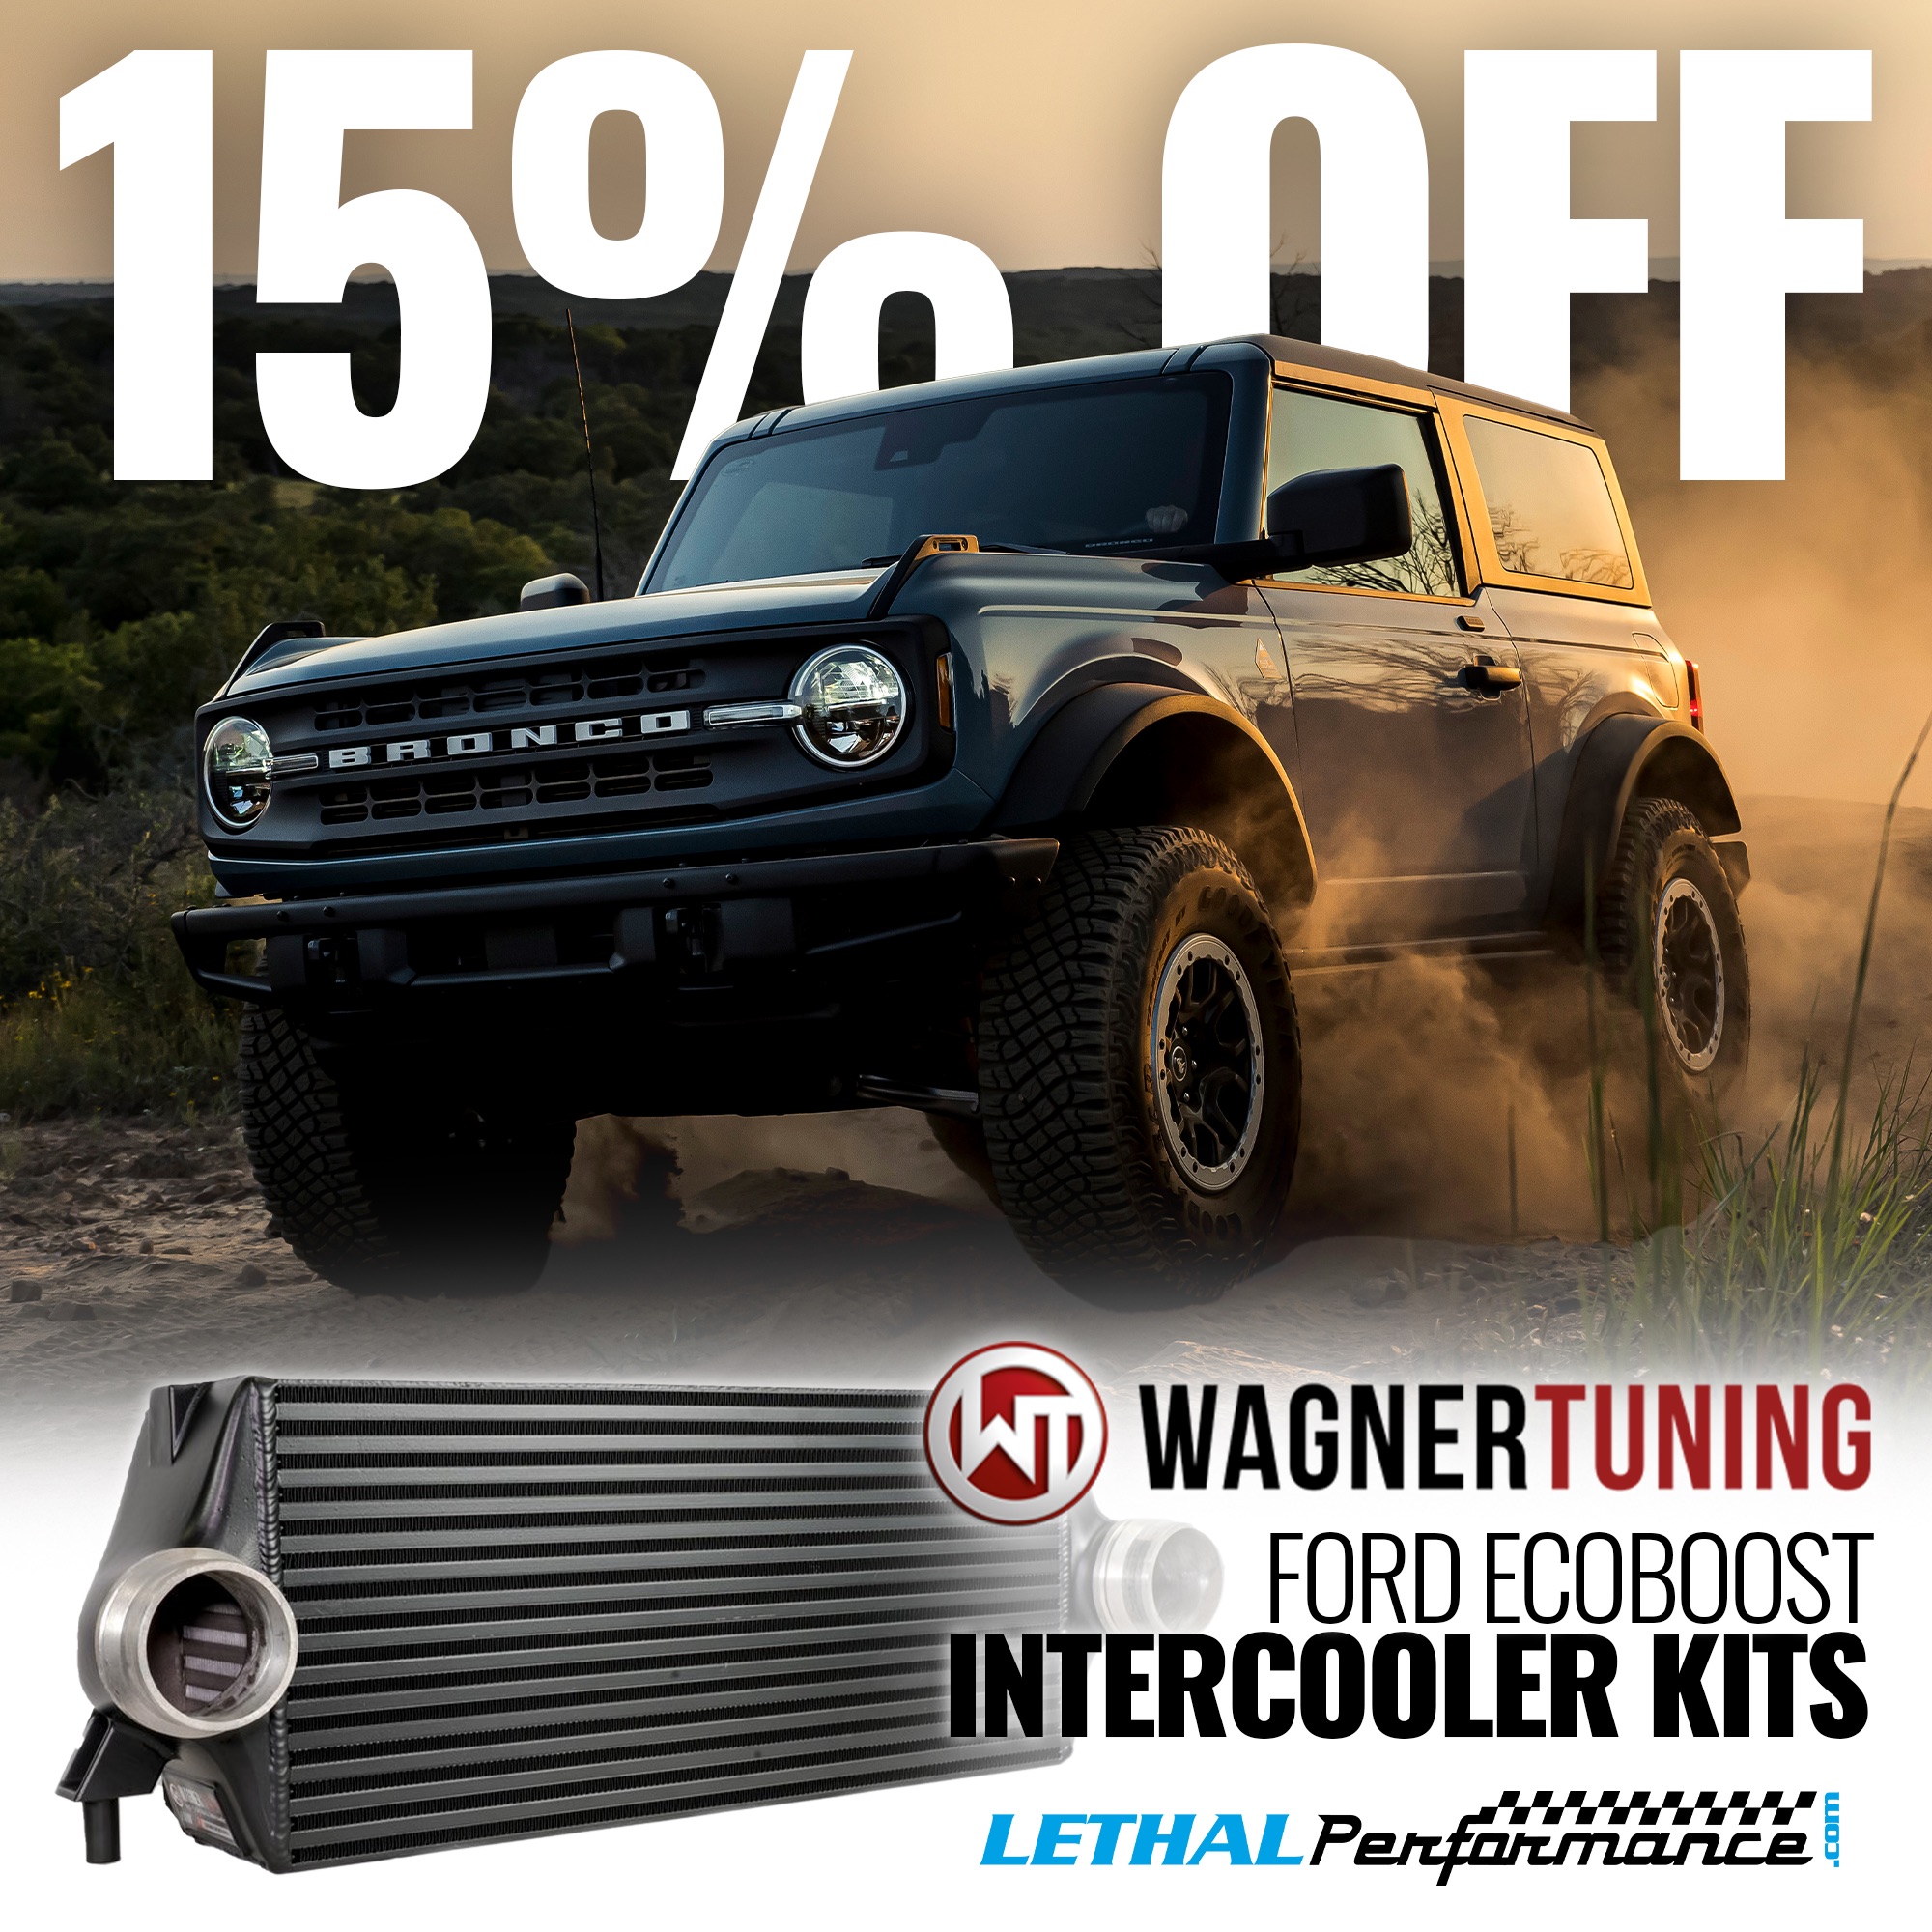 Ford Bronco Wagner Tuning Intercooler SALE here at Lethal Performance!! bronco wagnwer 15%